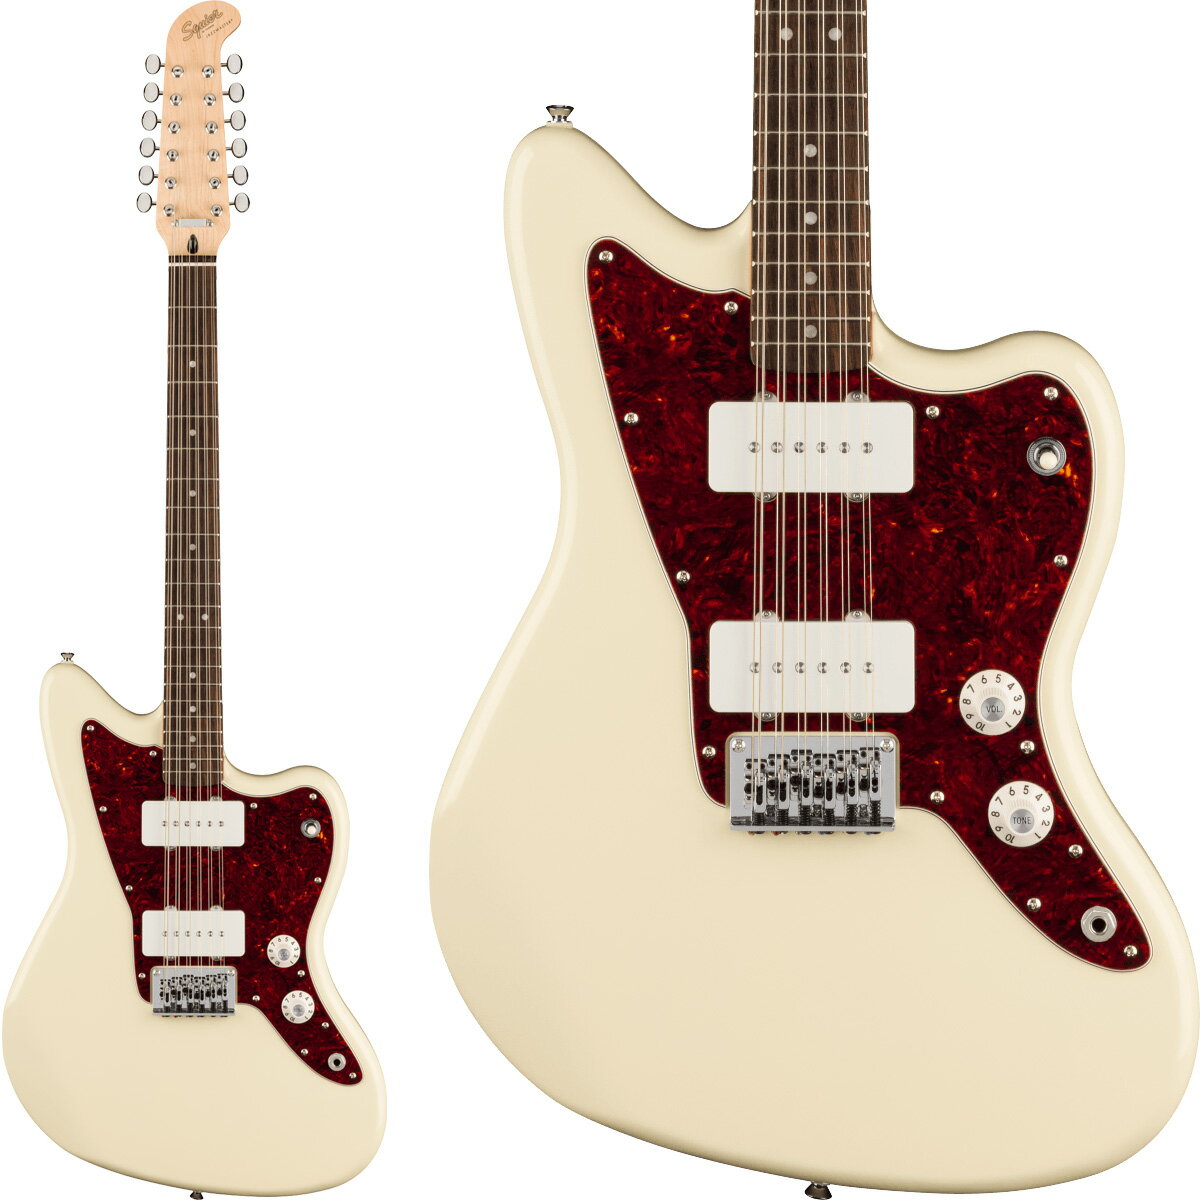 Squier by Fender Paranormal Jazzmaster XII Olympic White 12 㥺ޥ 쥭 磻䡼 / 磻